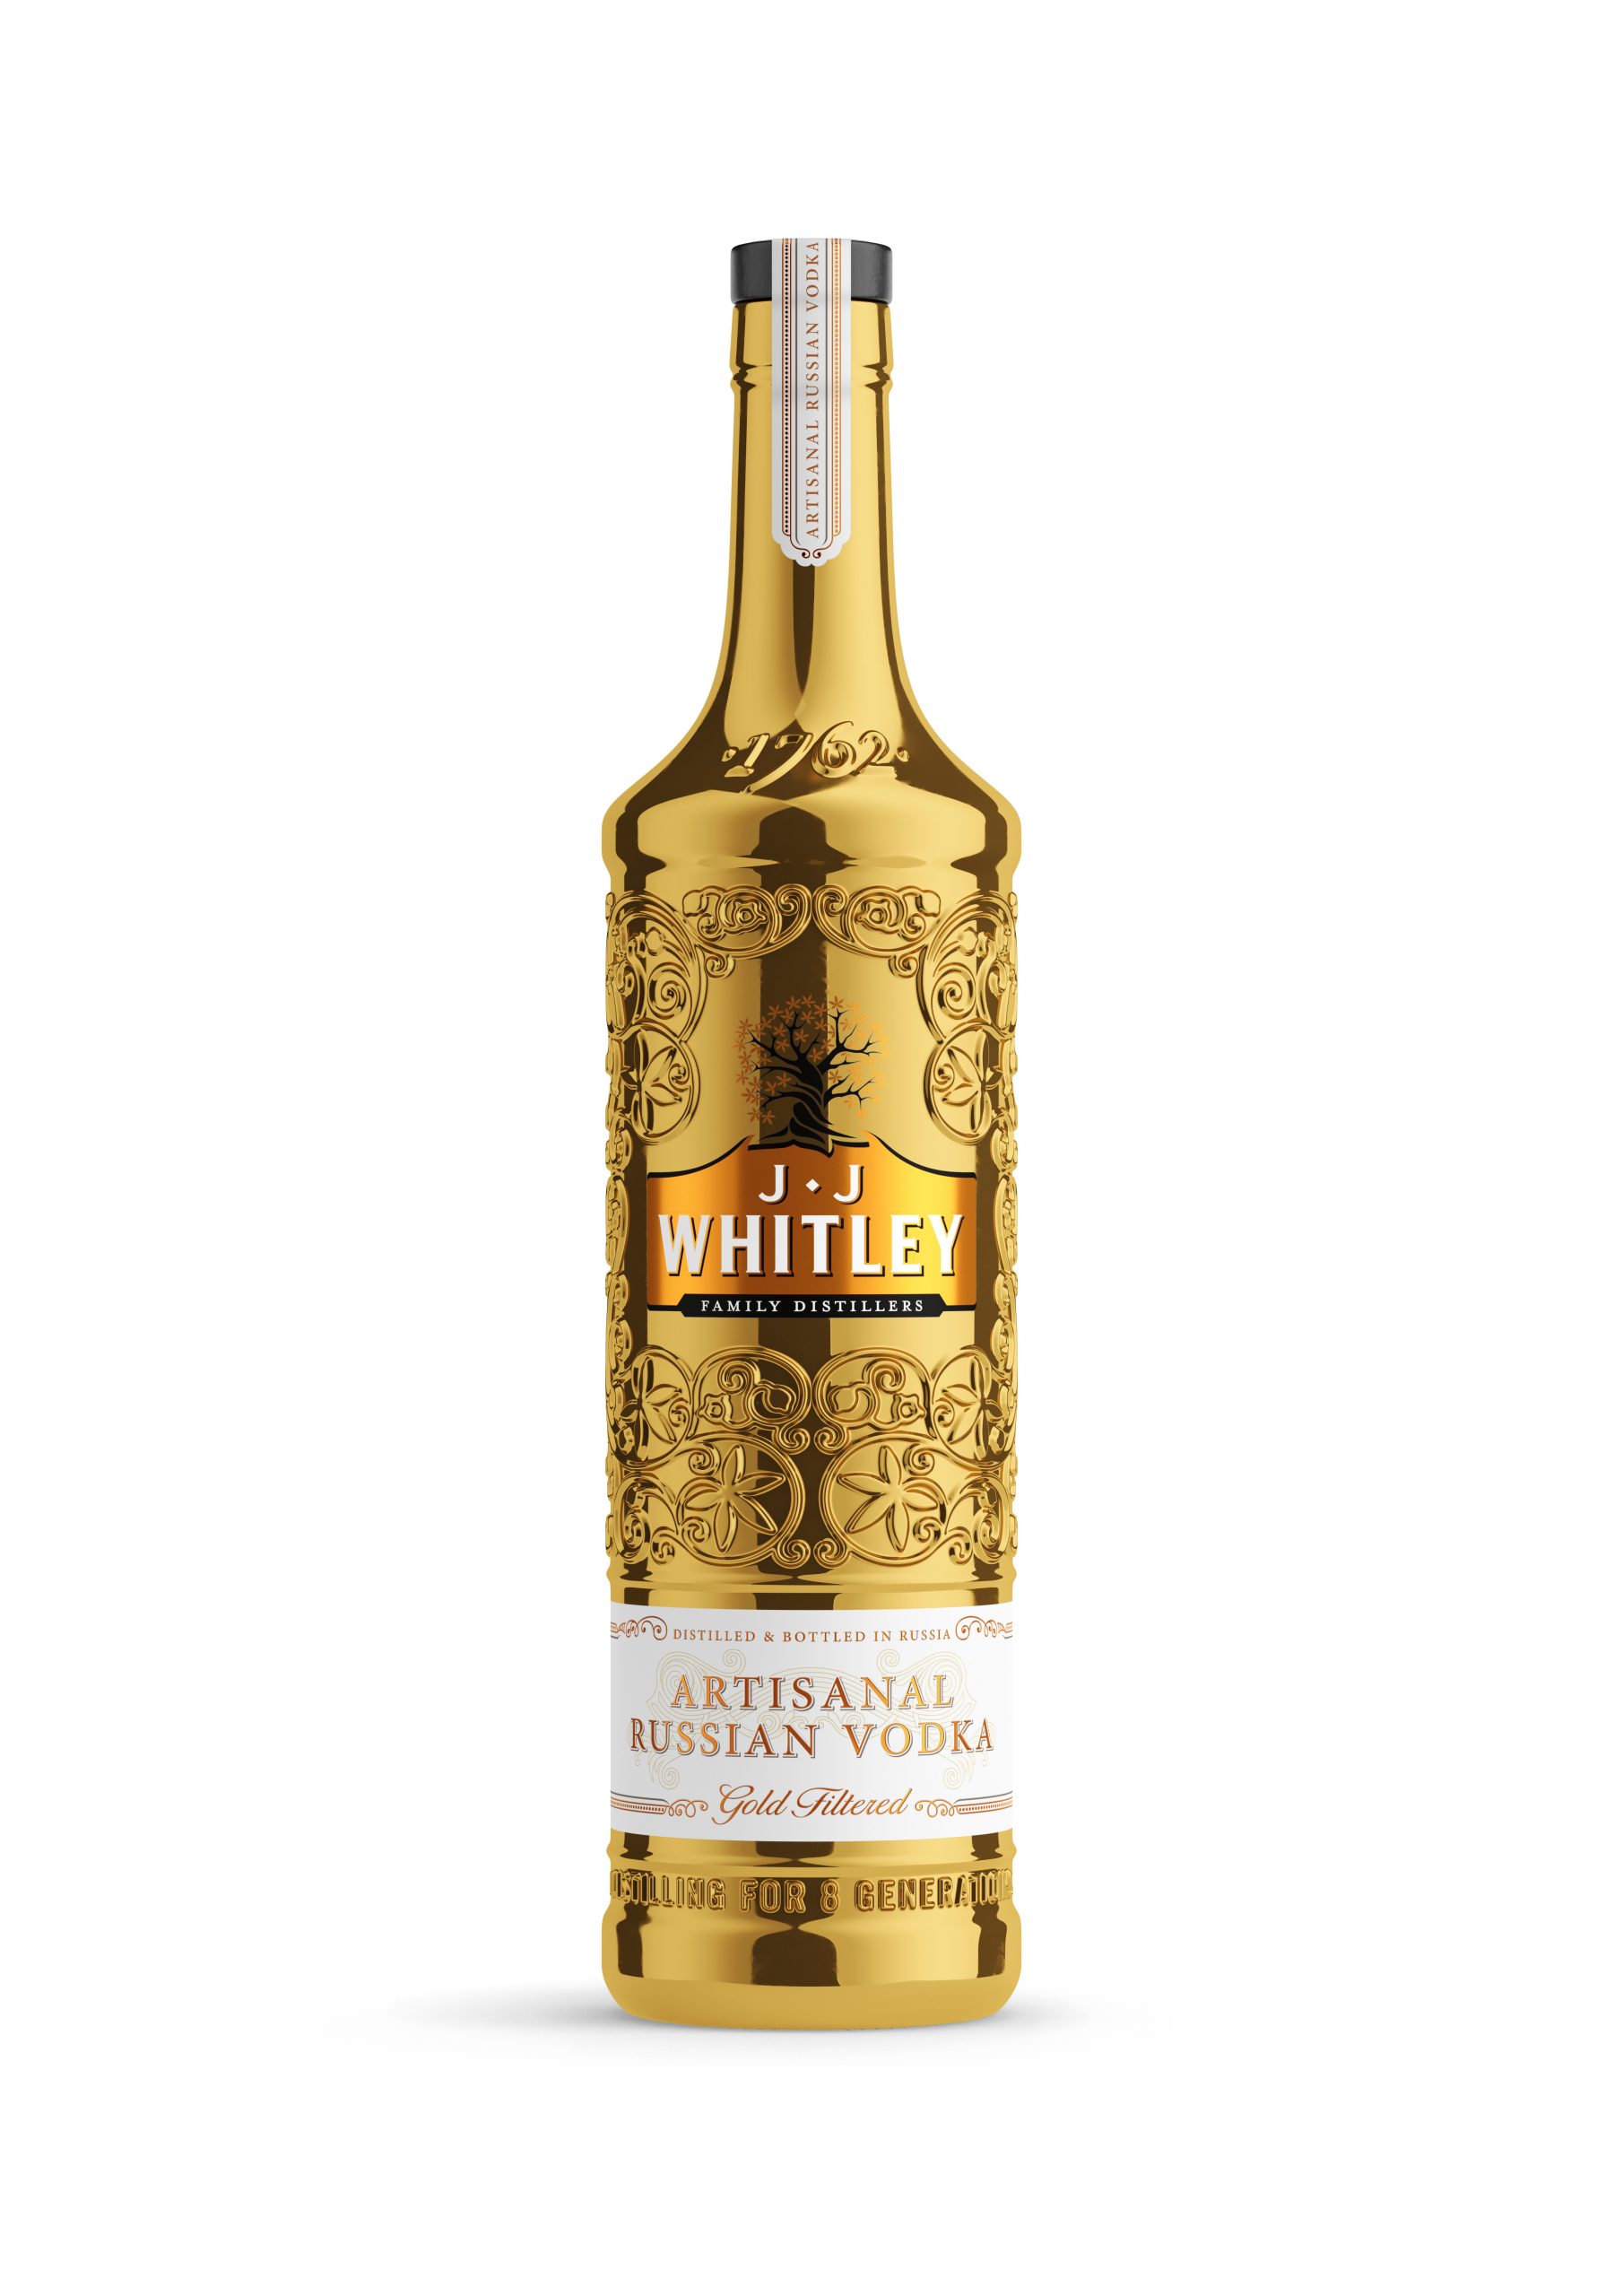 JJ Whitley goes for gold with new Vodka